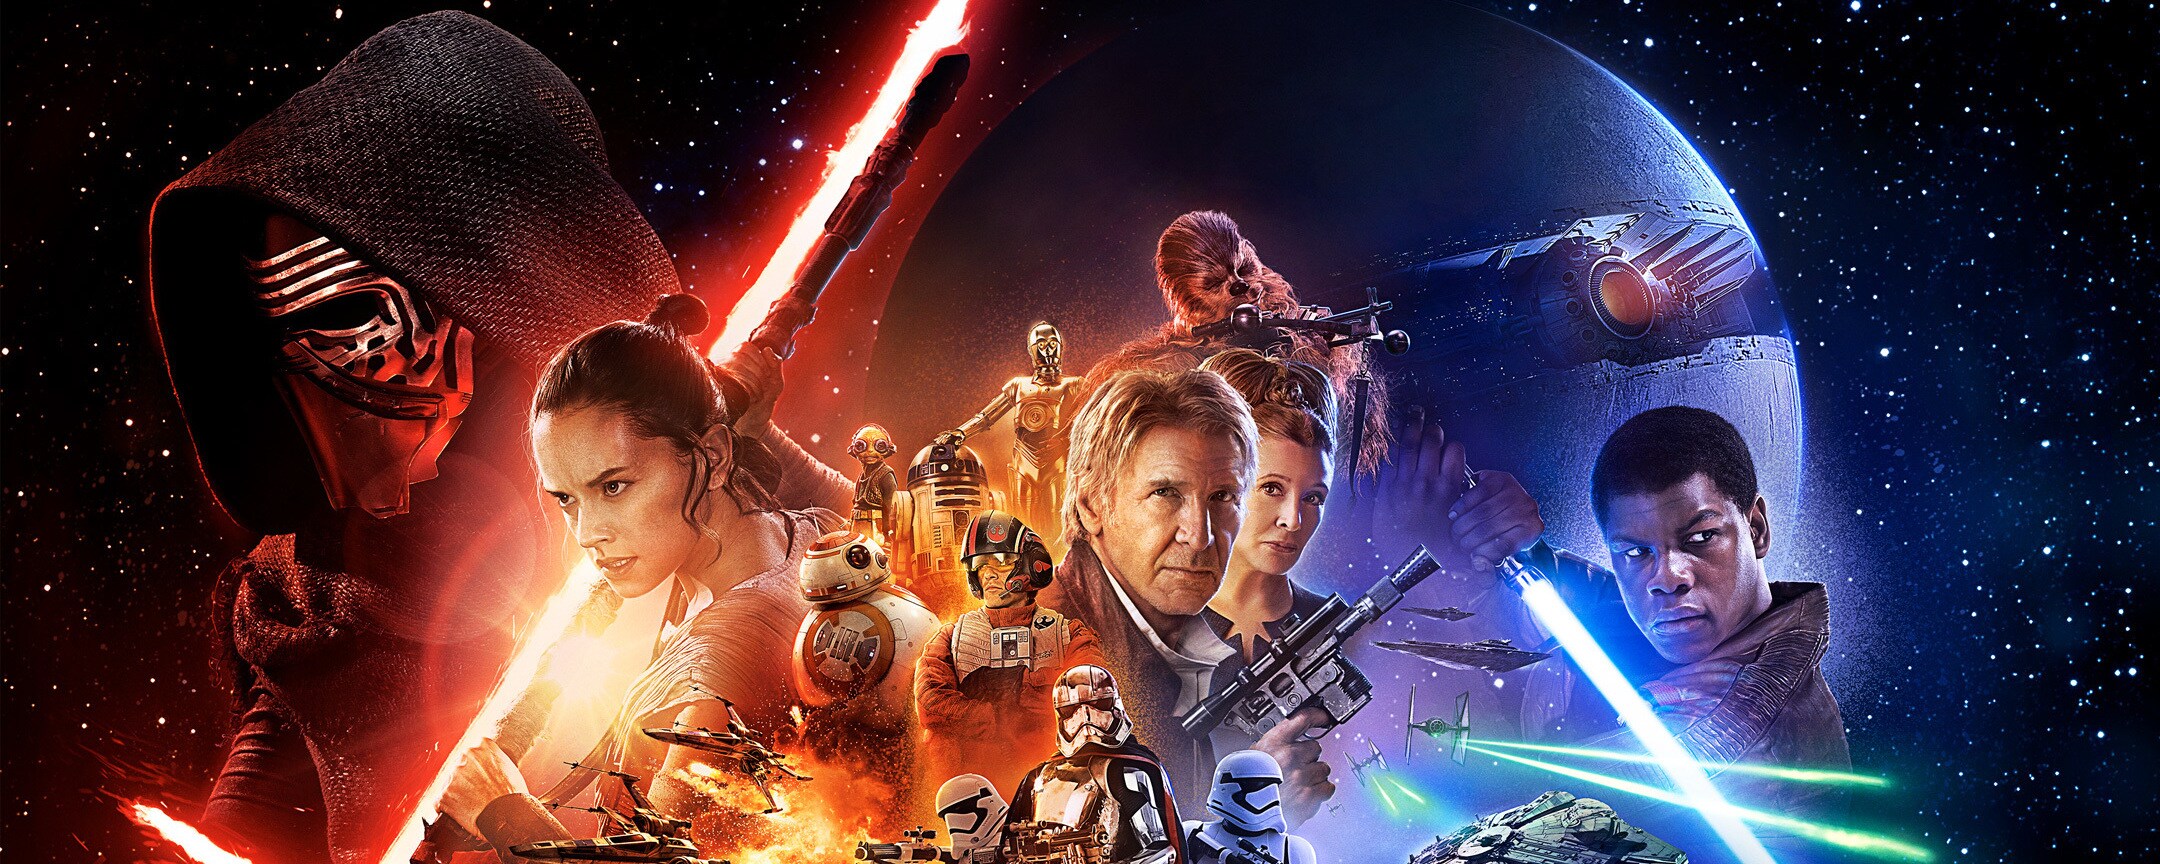 Star Wars: The Force Awakens Theatrical Poster First Look, In-theater Exclusives and More | StarWars.com